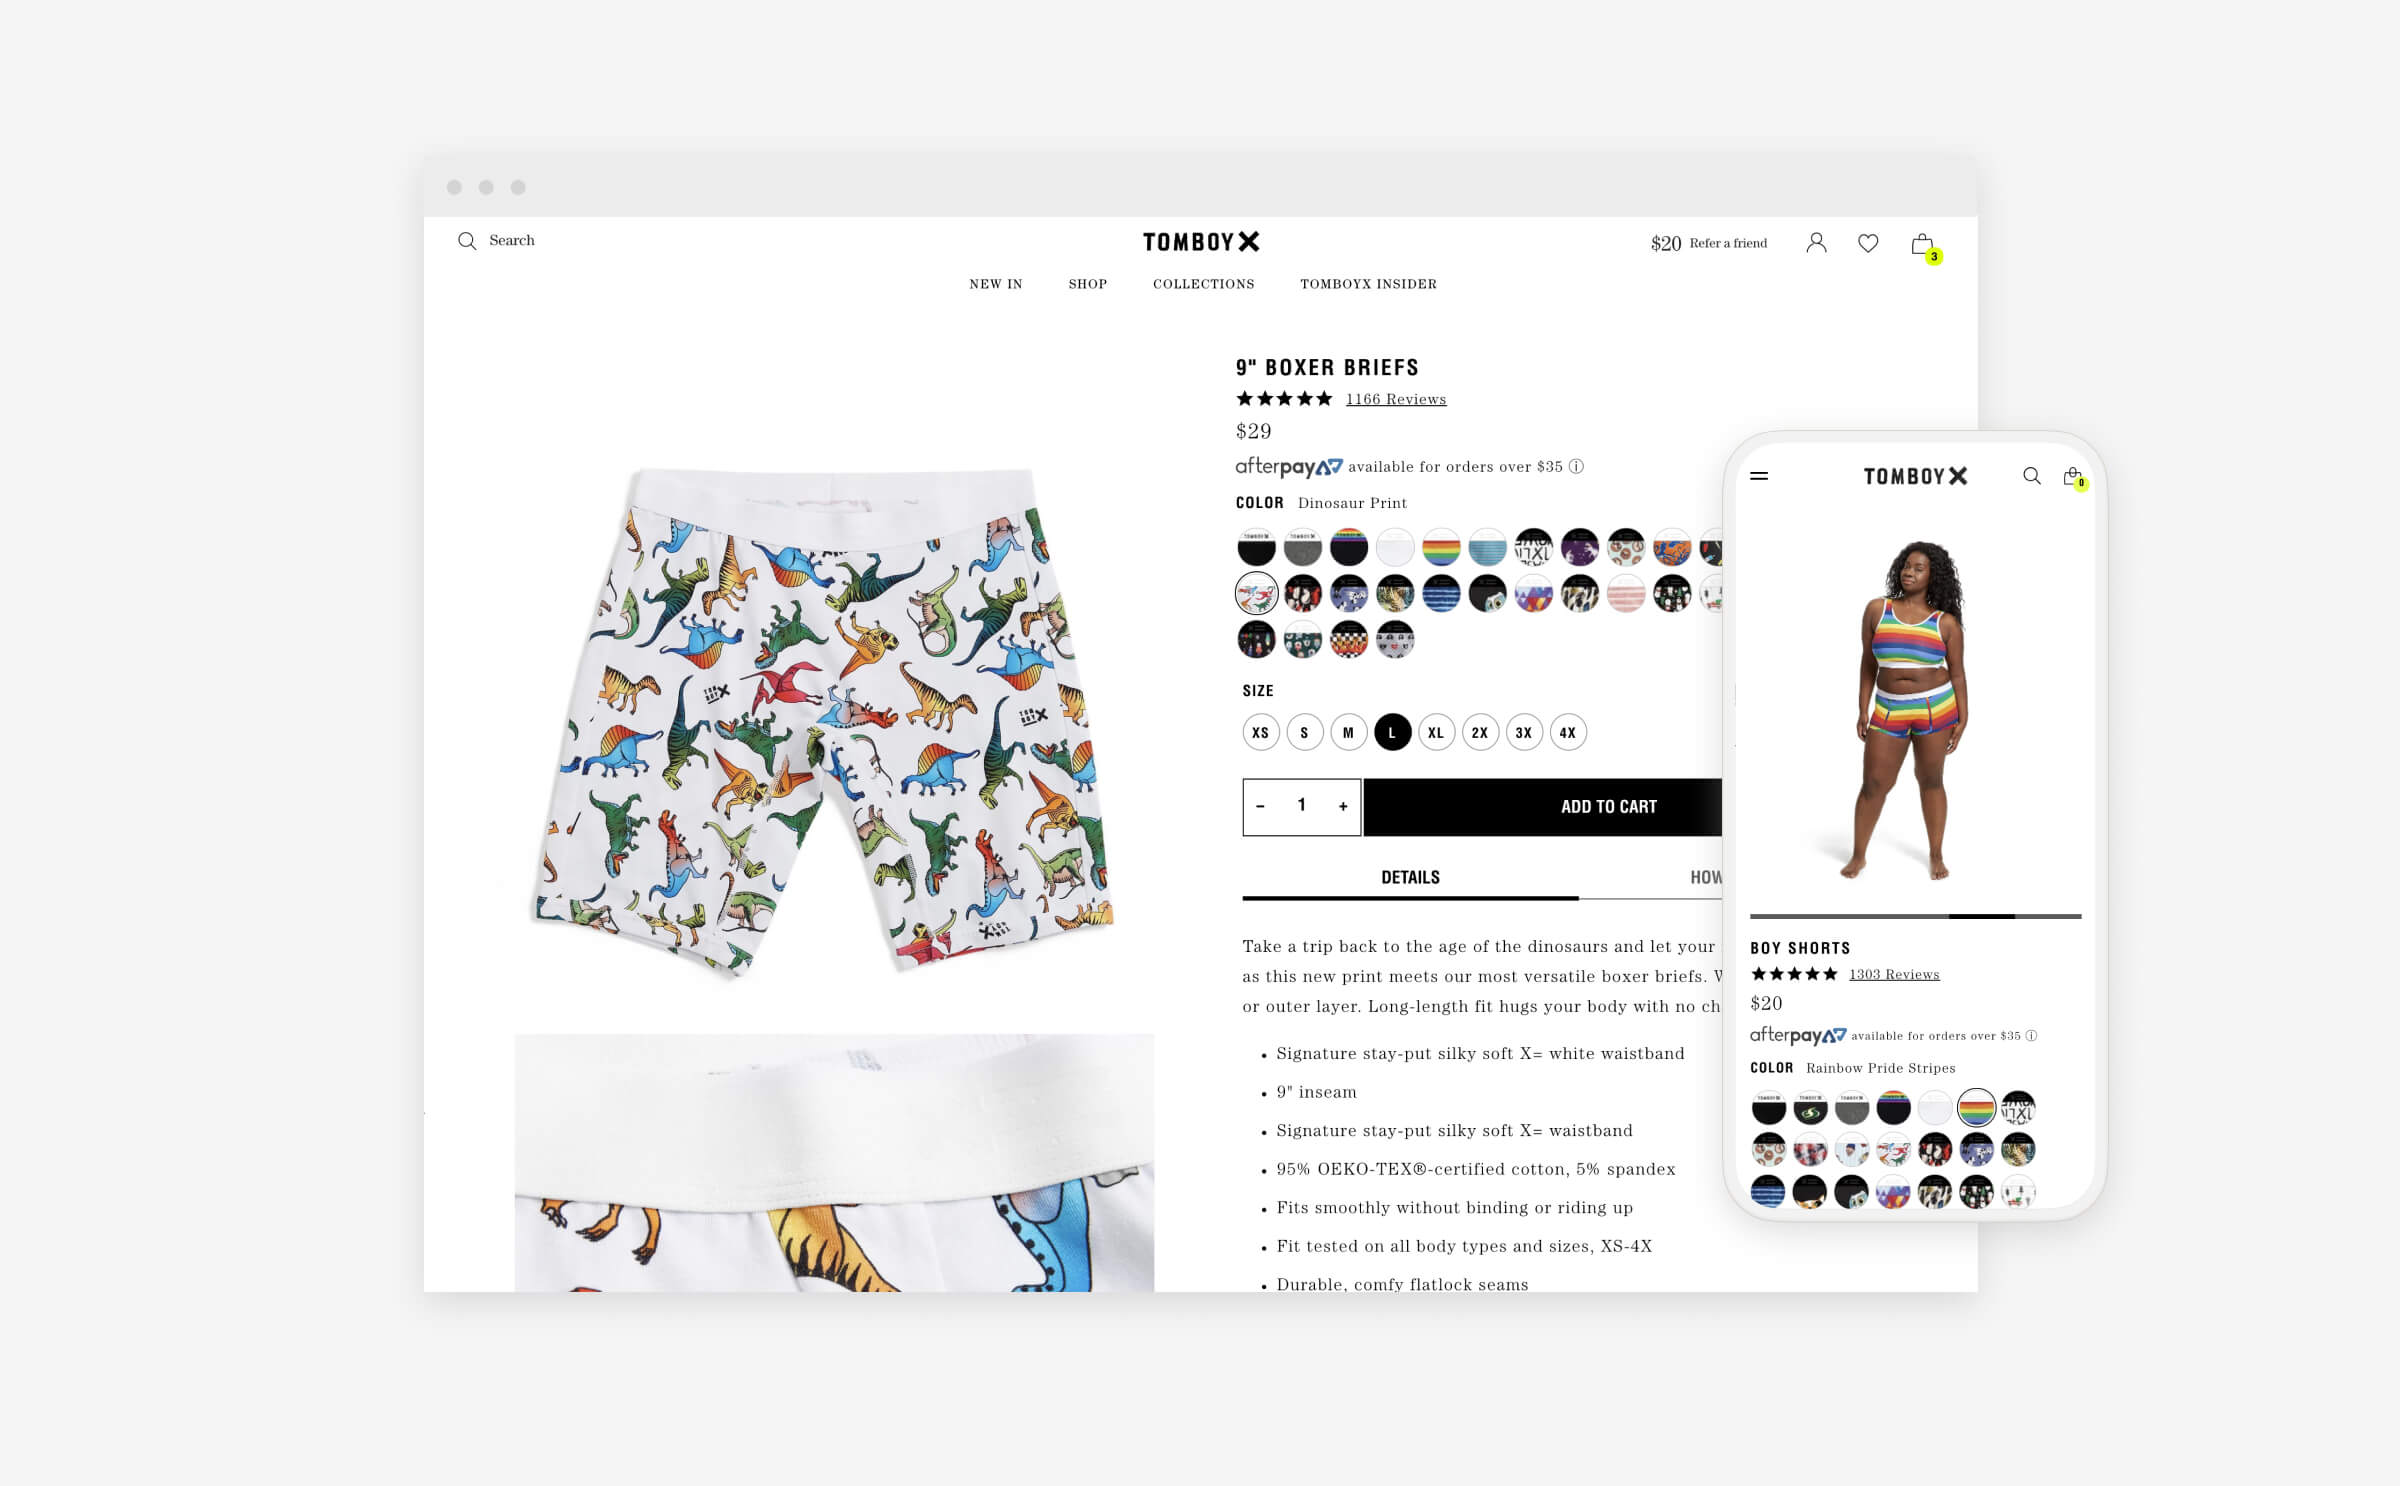 tomboy x website product pages on desktop and mobile devices